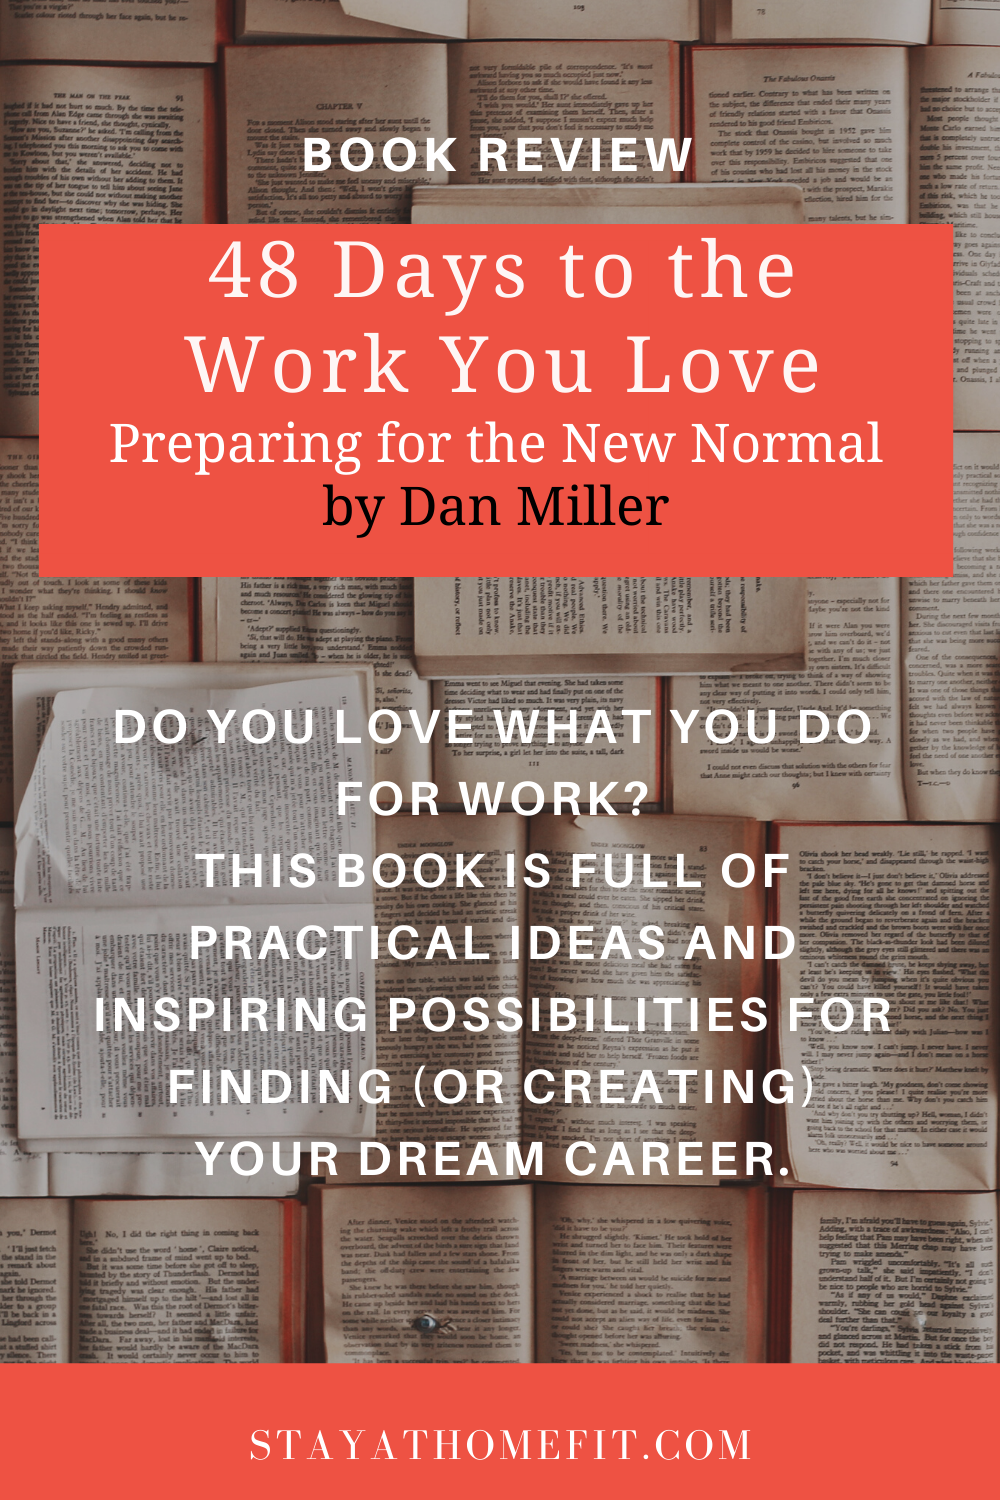 48 Days to the Work You Love by Dan Miller Book Review